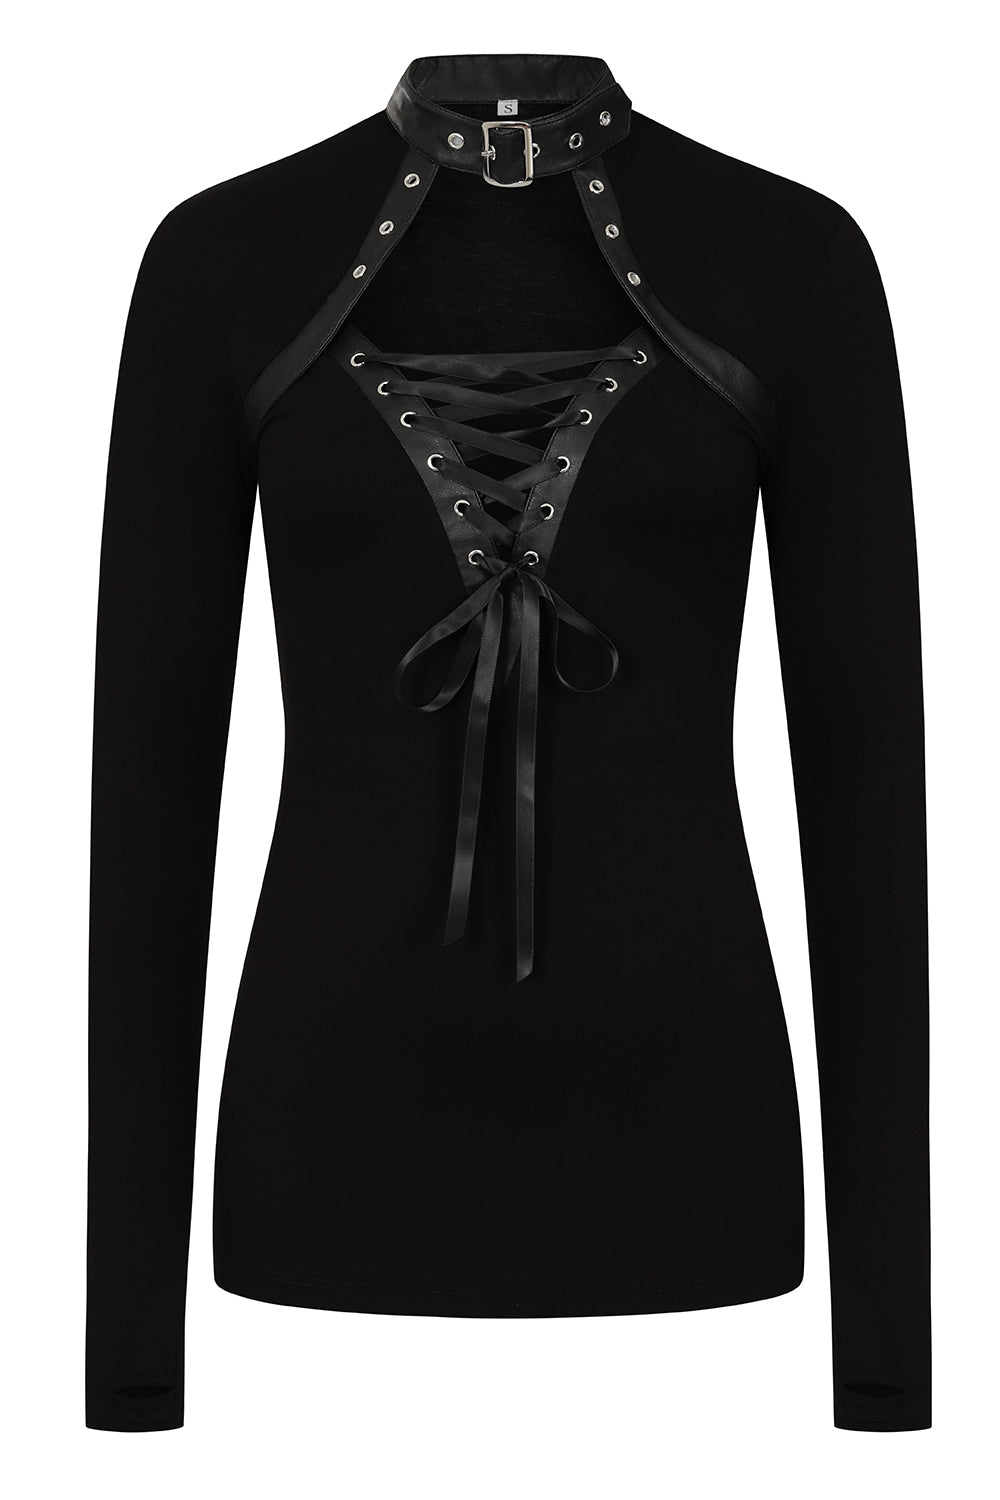 Necessary Evil Dione Long Sleeve Lace Up Plunge Top - Kate's Clothing